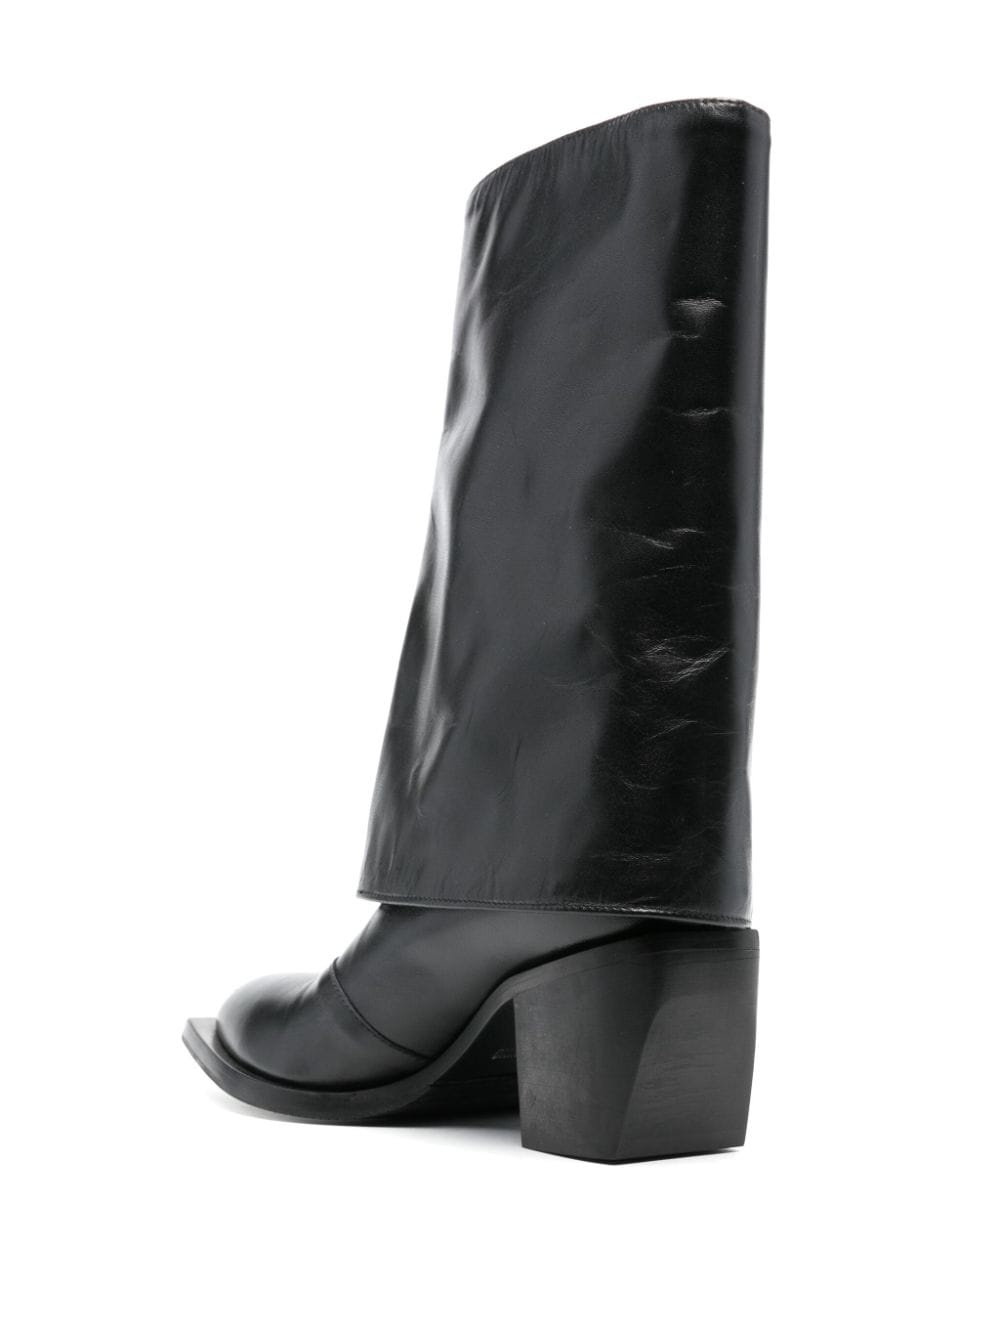 70mm foldover leather cowboy boots - 3